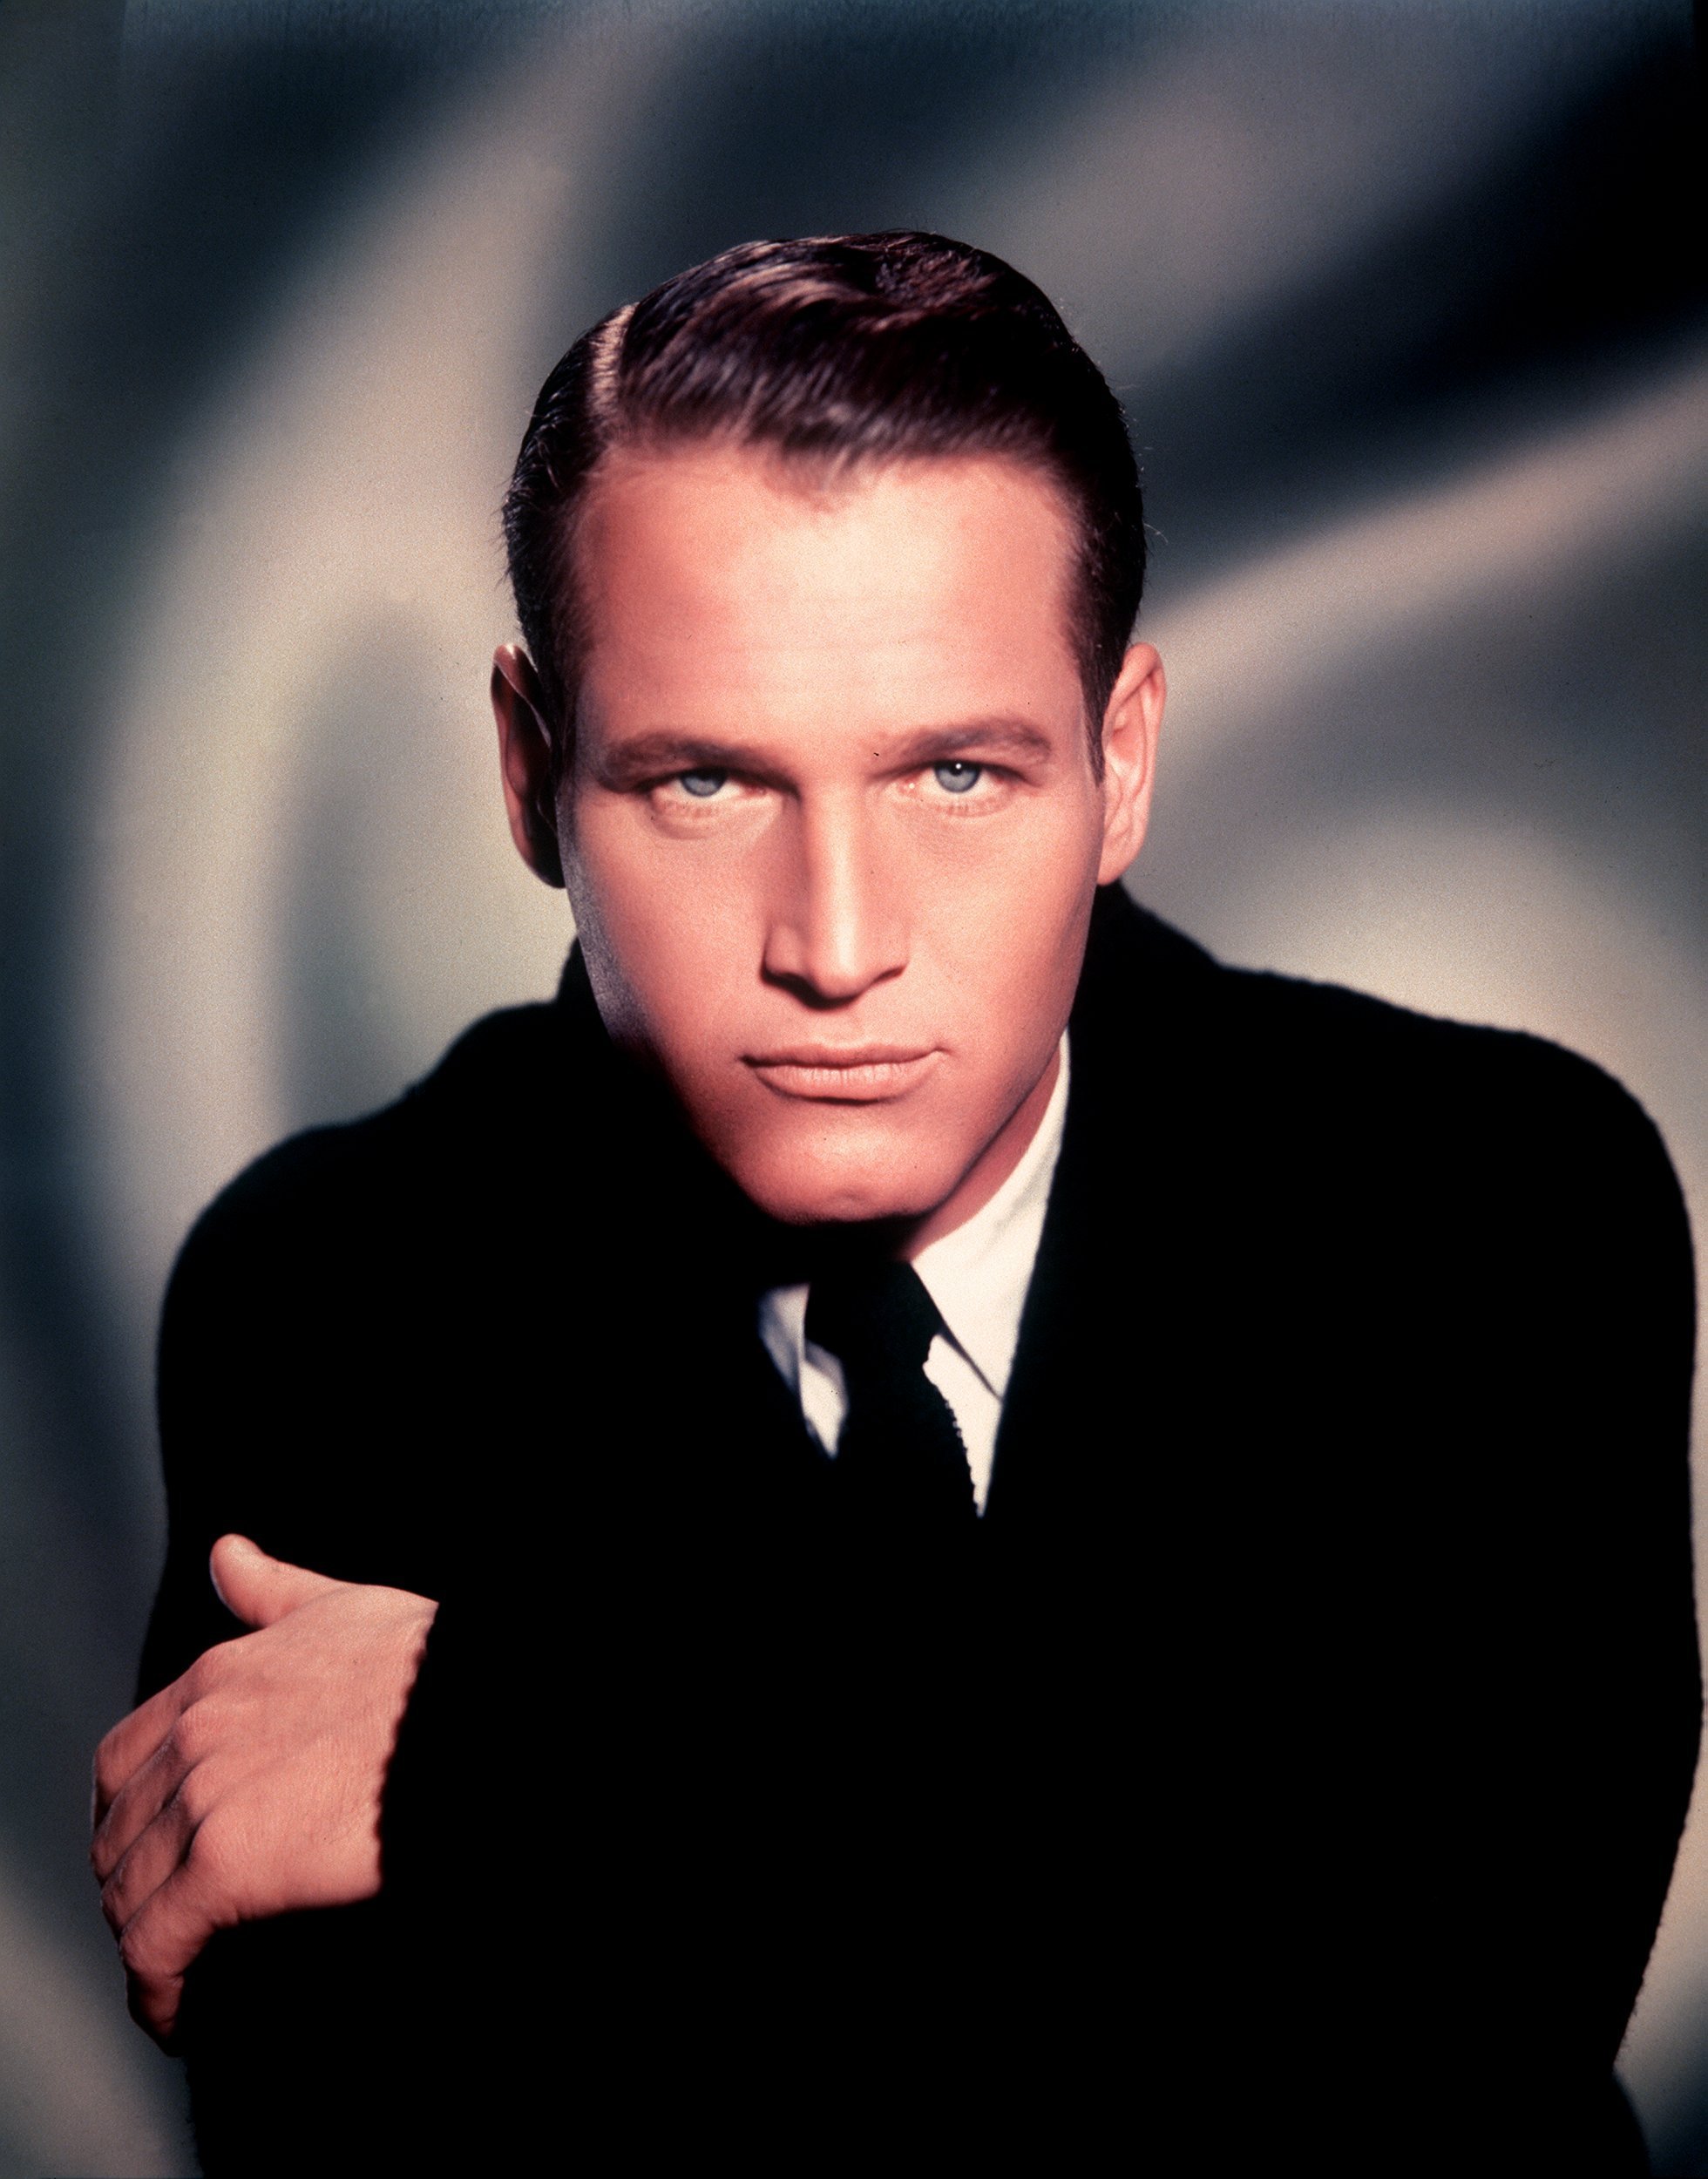 Paul Newman photo 93 of 96 pics, wallpaper - photo #364431 - ThePlace2